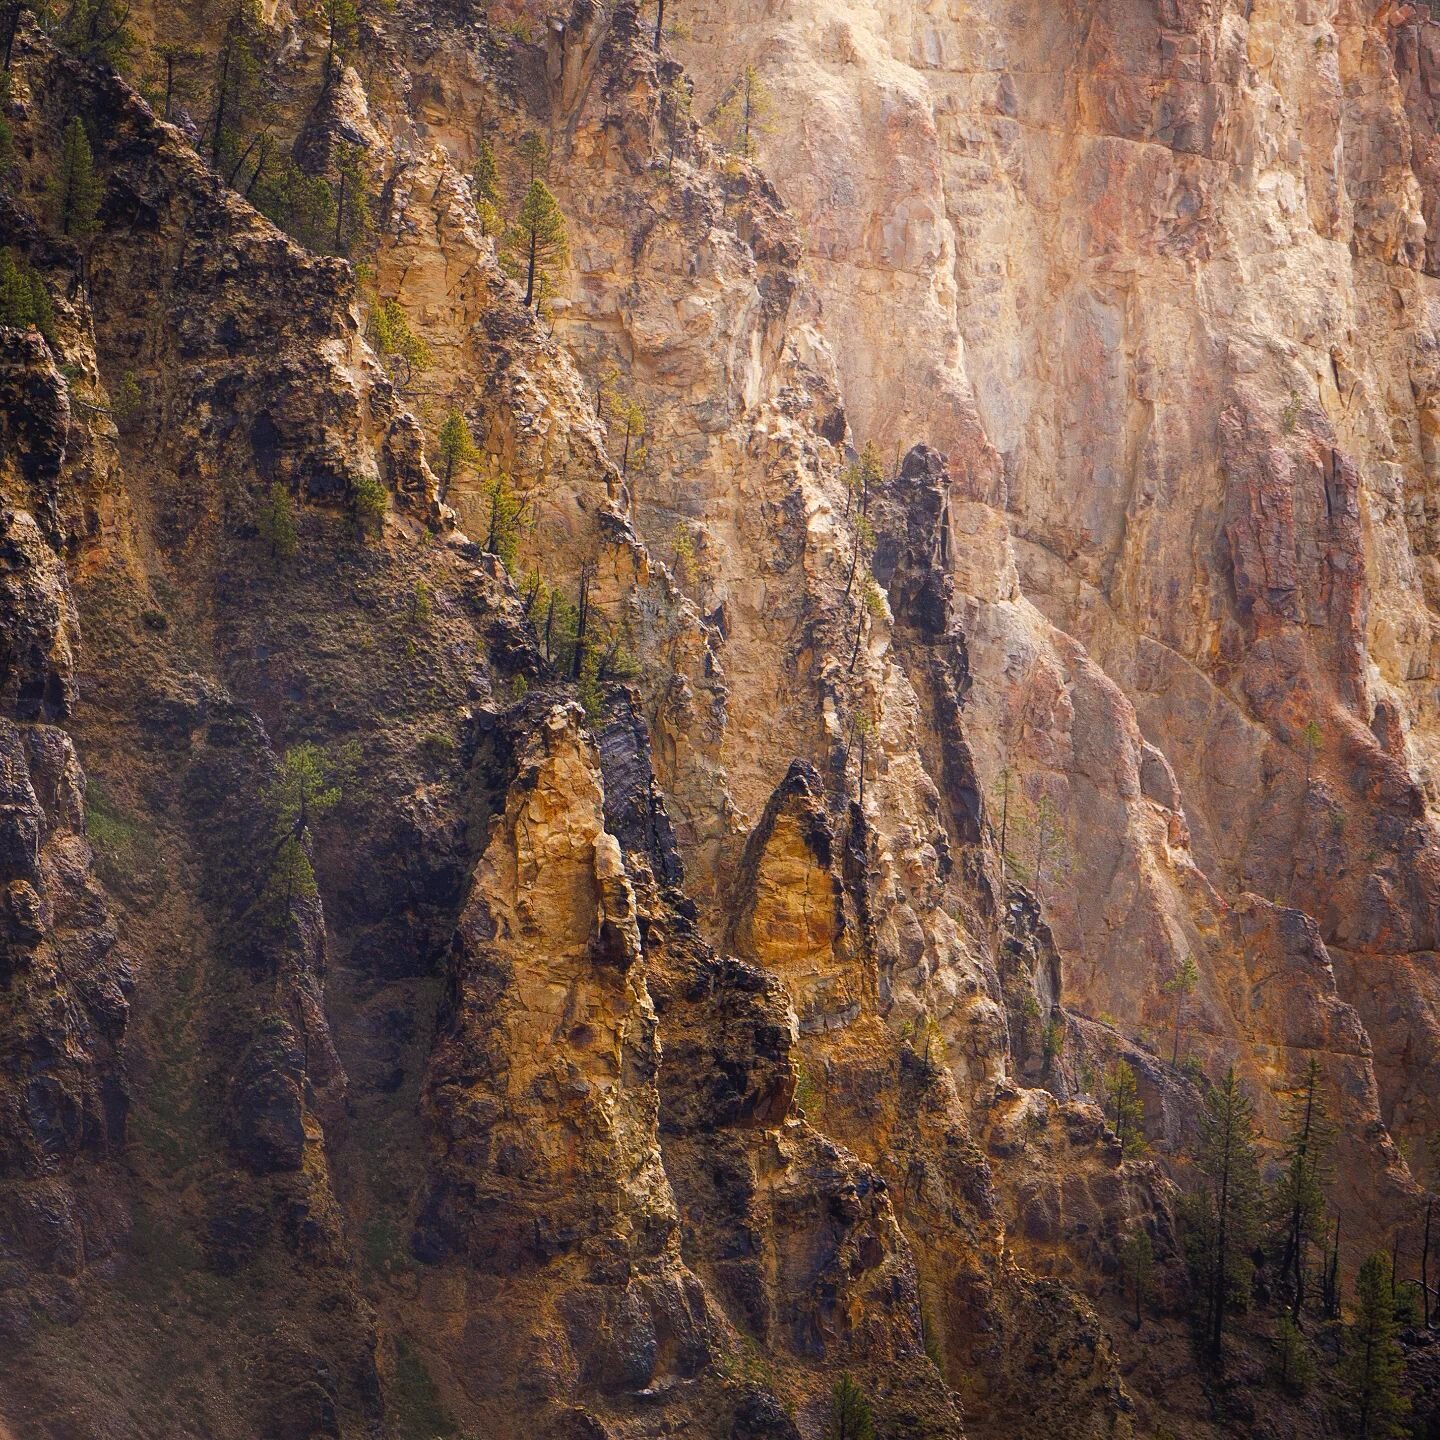 Everyone else was busy snapping rainy photos of Yellowstone falls while I grabbed this little abstract scene.

One of my favorite things is trying to pick out small scenes with a telephoto in HIGHLY popular areas. It's a fun challenge. This is a fair